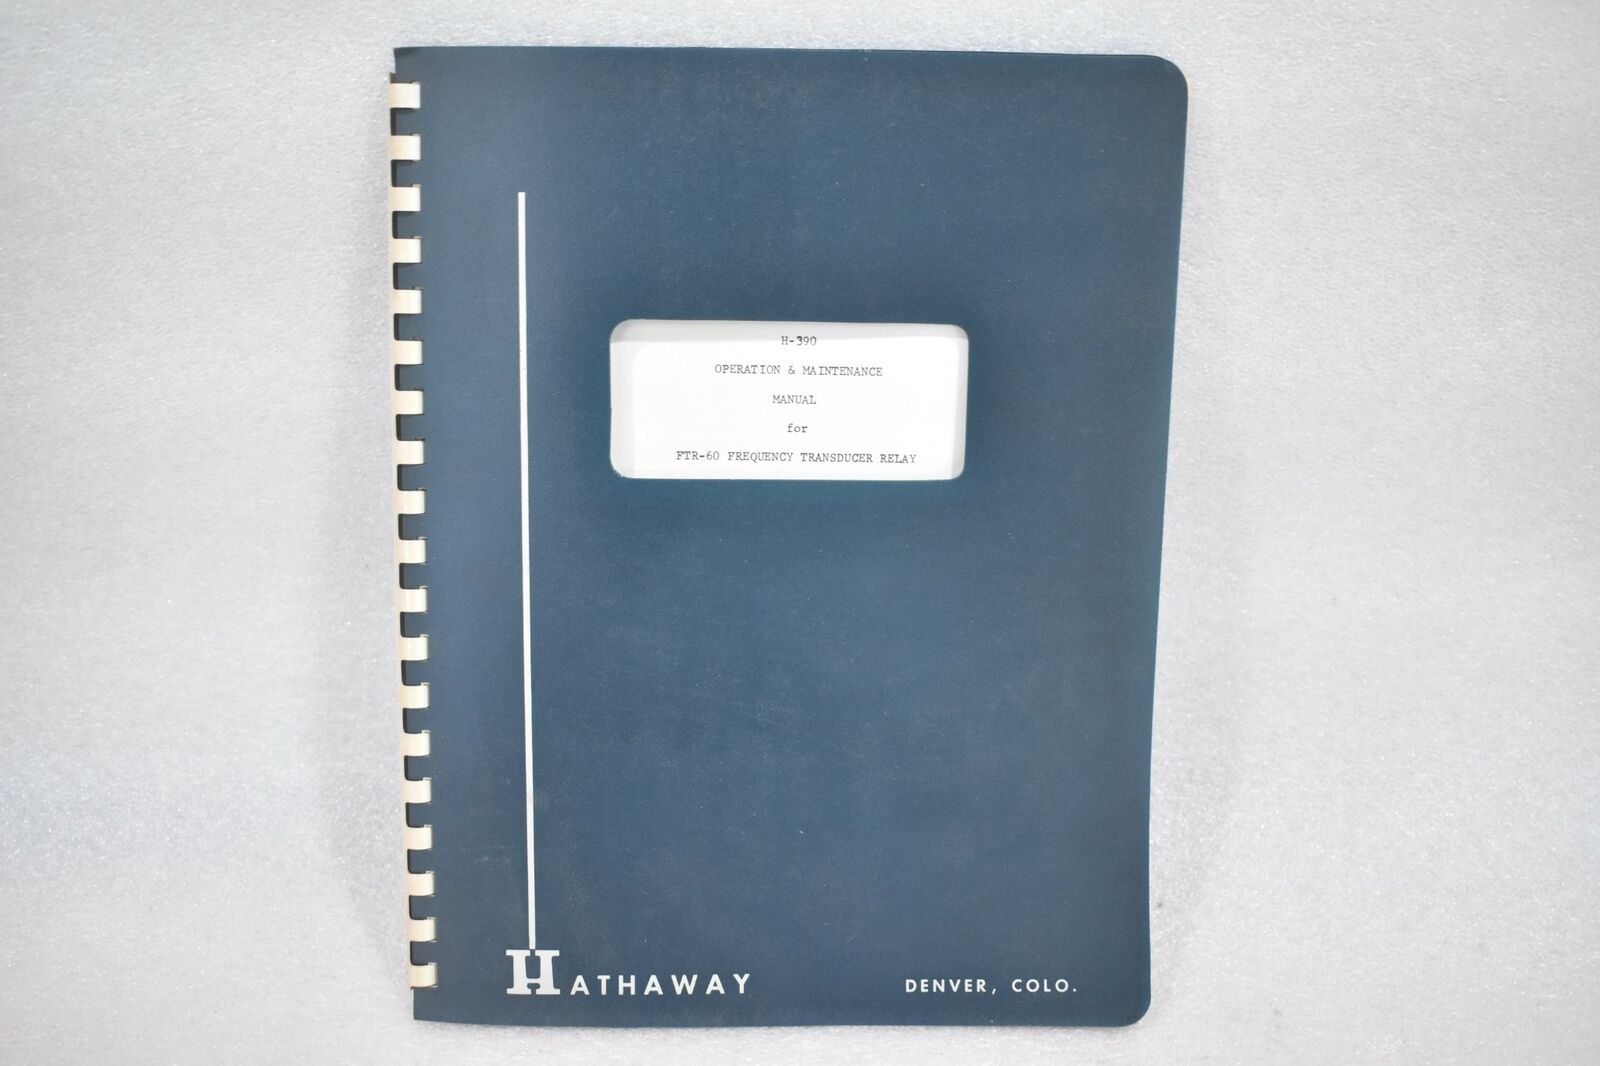 HATHAWAY H-390 OPERATION & MAINTENANCE MANUAL FOR FTR-60 FREQUENCY TRANSDUCER RE